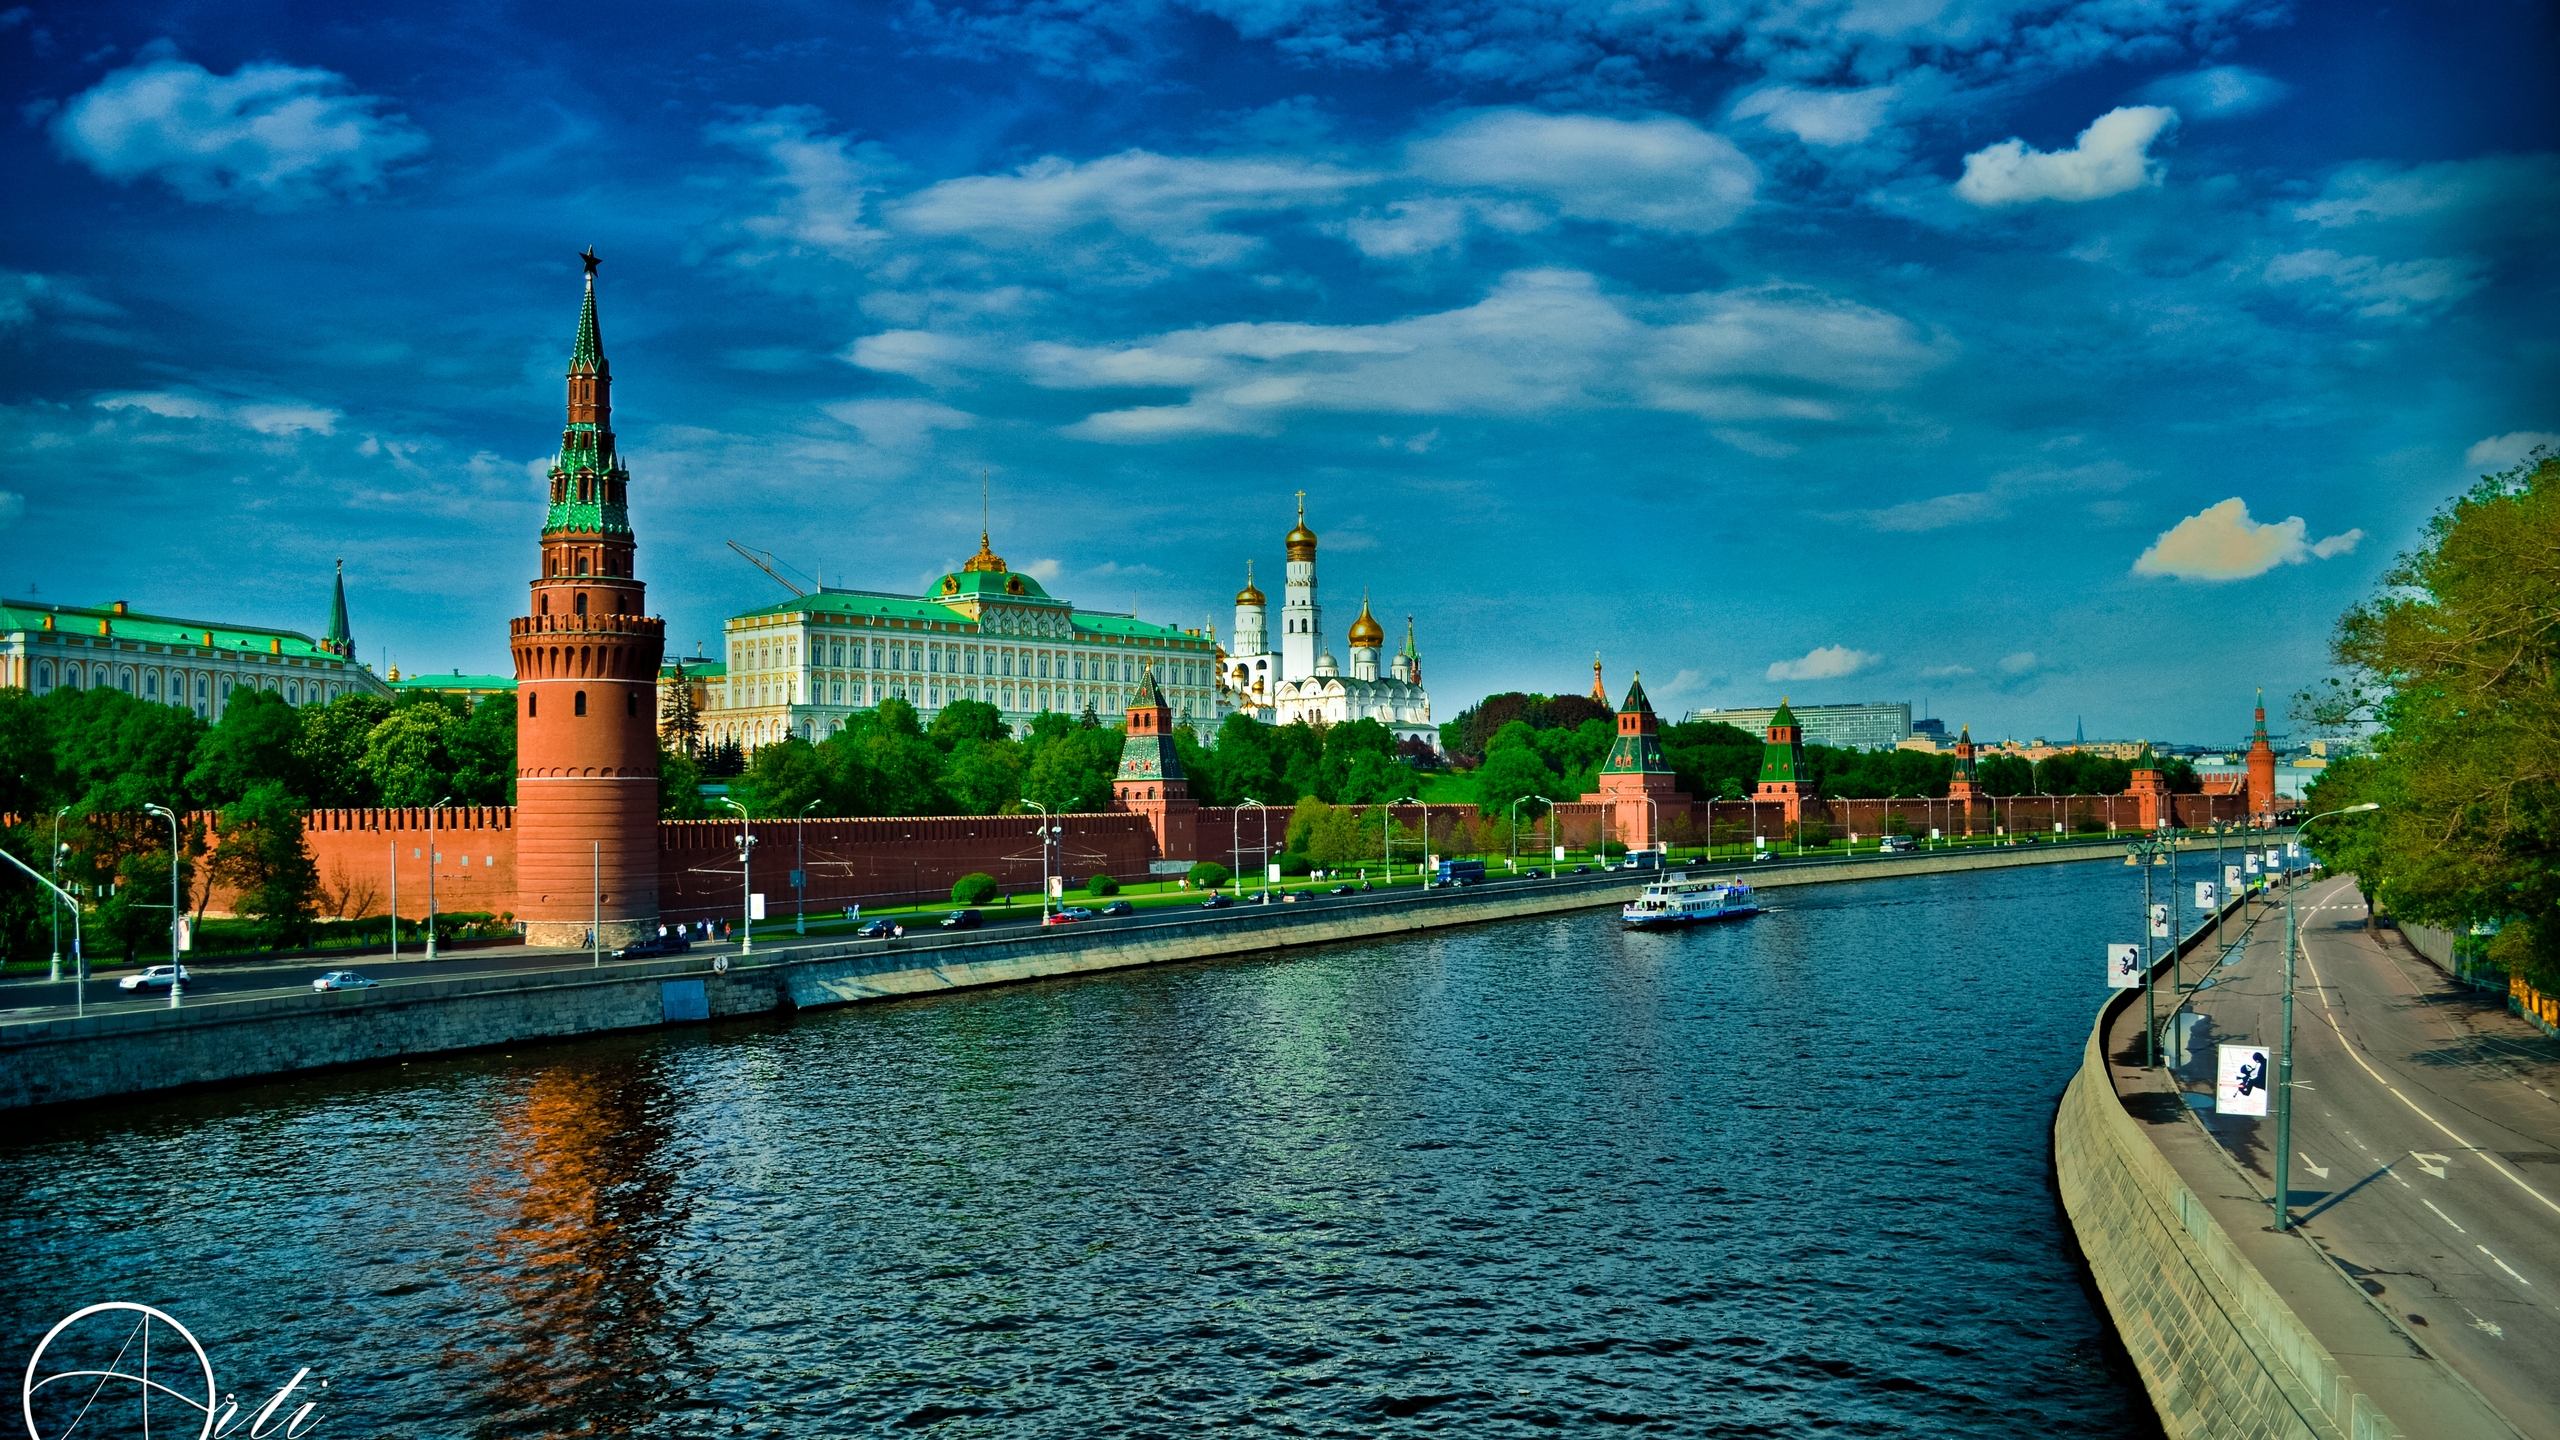 The Kremlin Moscow for 2560x1440 HDTV resolution